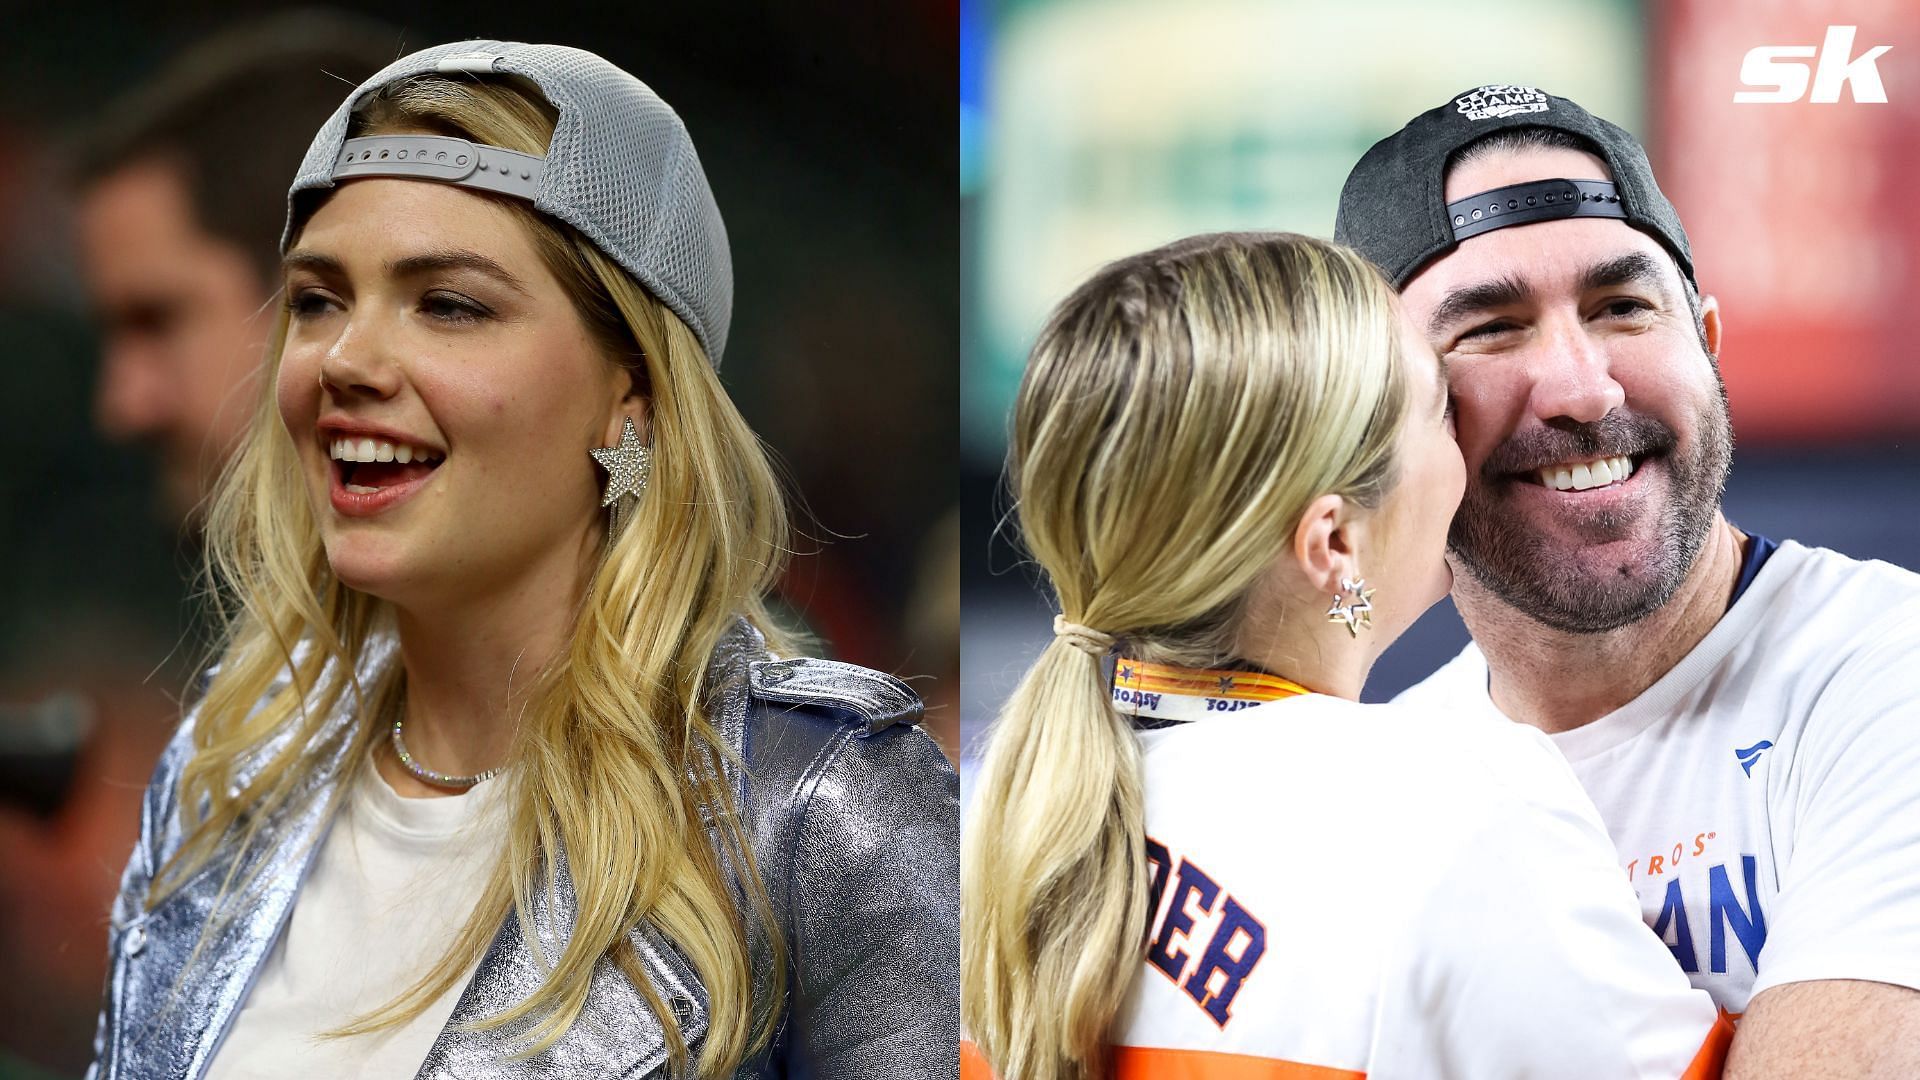 MLB fans shower love on Justin Verlander&rsquo;s wife Kate Upton as model shares adorable moments from their family vacation